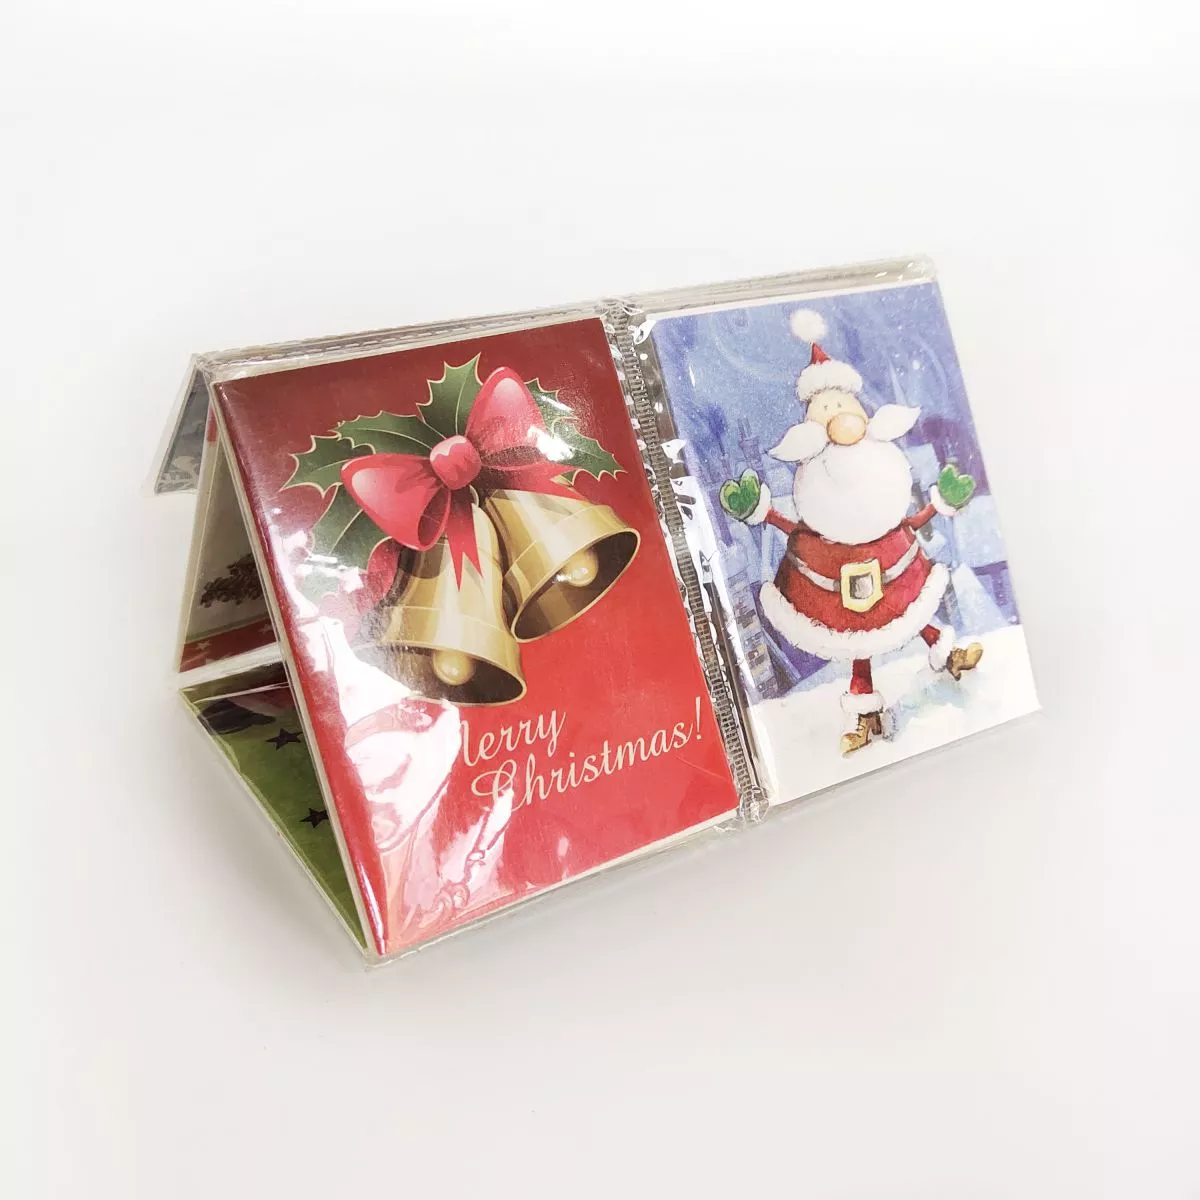 PP003 Printed Christmas Cards